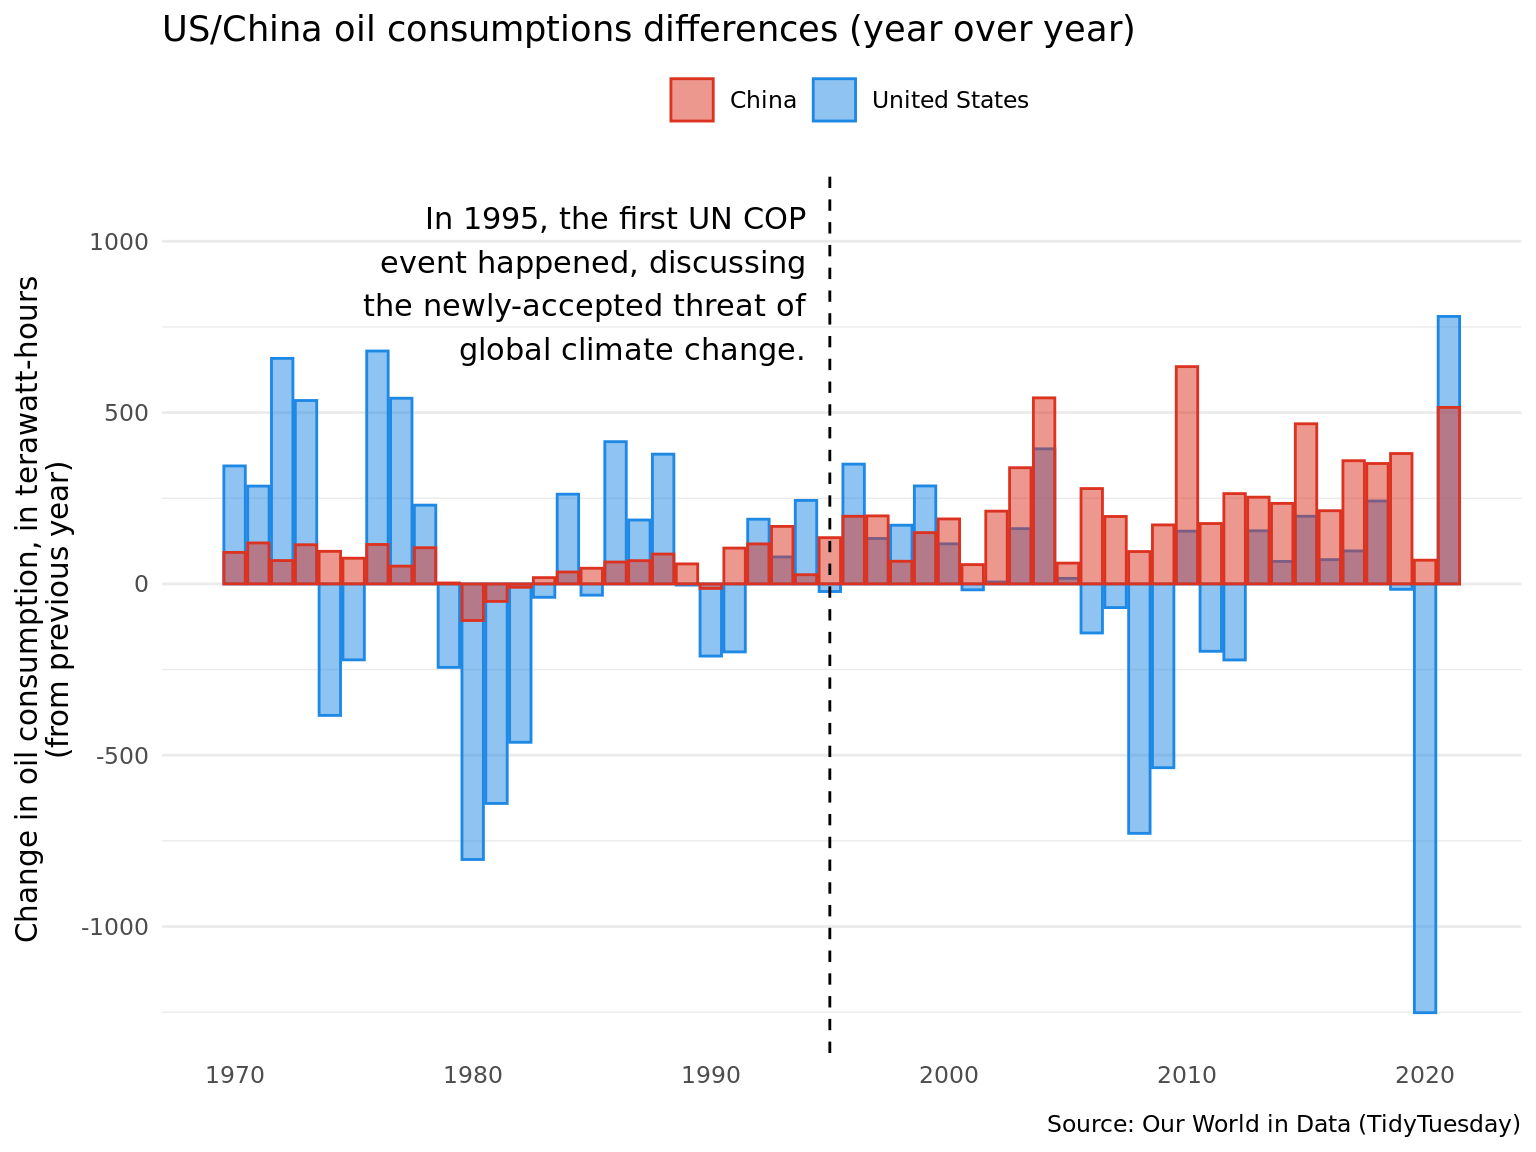 The title of this graph is US/China oil consumption differences (year over year). It is an overlaid bar graph that includes negative values where the x axis is the year that the bin covers, and the y axis is the change in the barrels of oil used to generate electricity compared to the previous year. The overlaid histograms show that China's oil consumption has been steadily increasing since 1995, the year that the UN first met to discuss climate change. Since 1995, the US oil consumption rates have either decreased or increased less than China for all but four years.